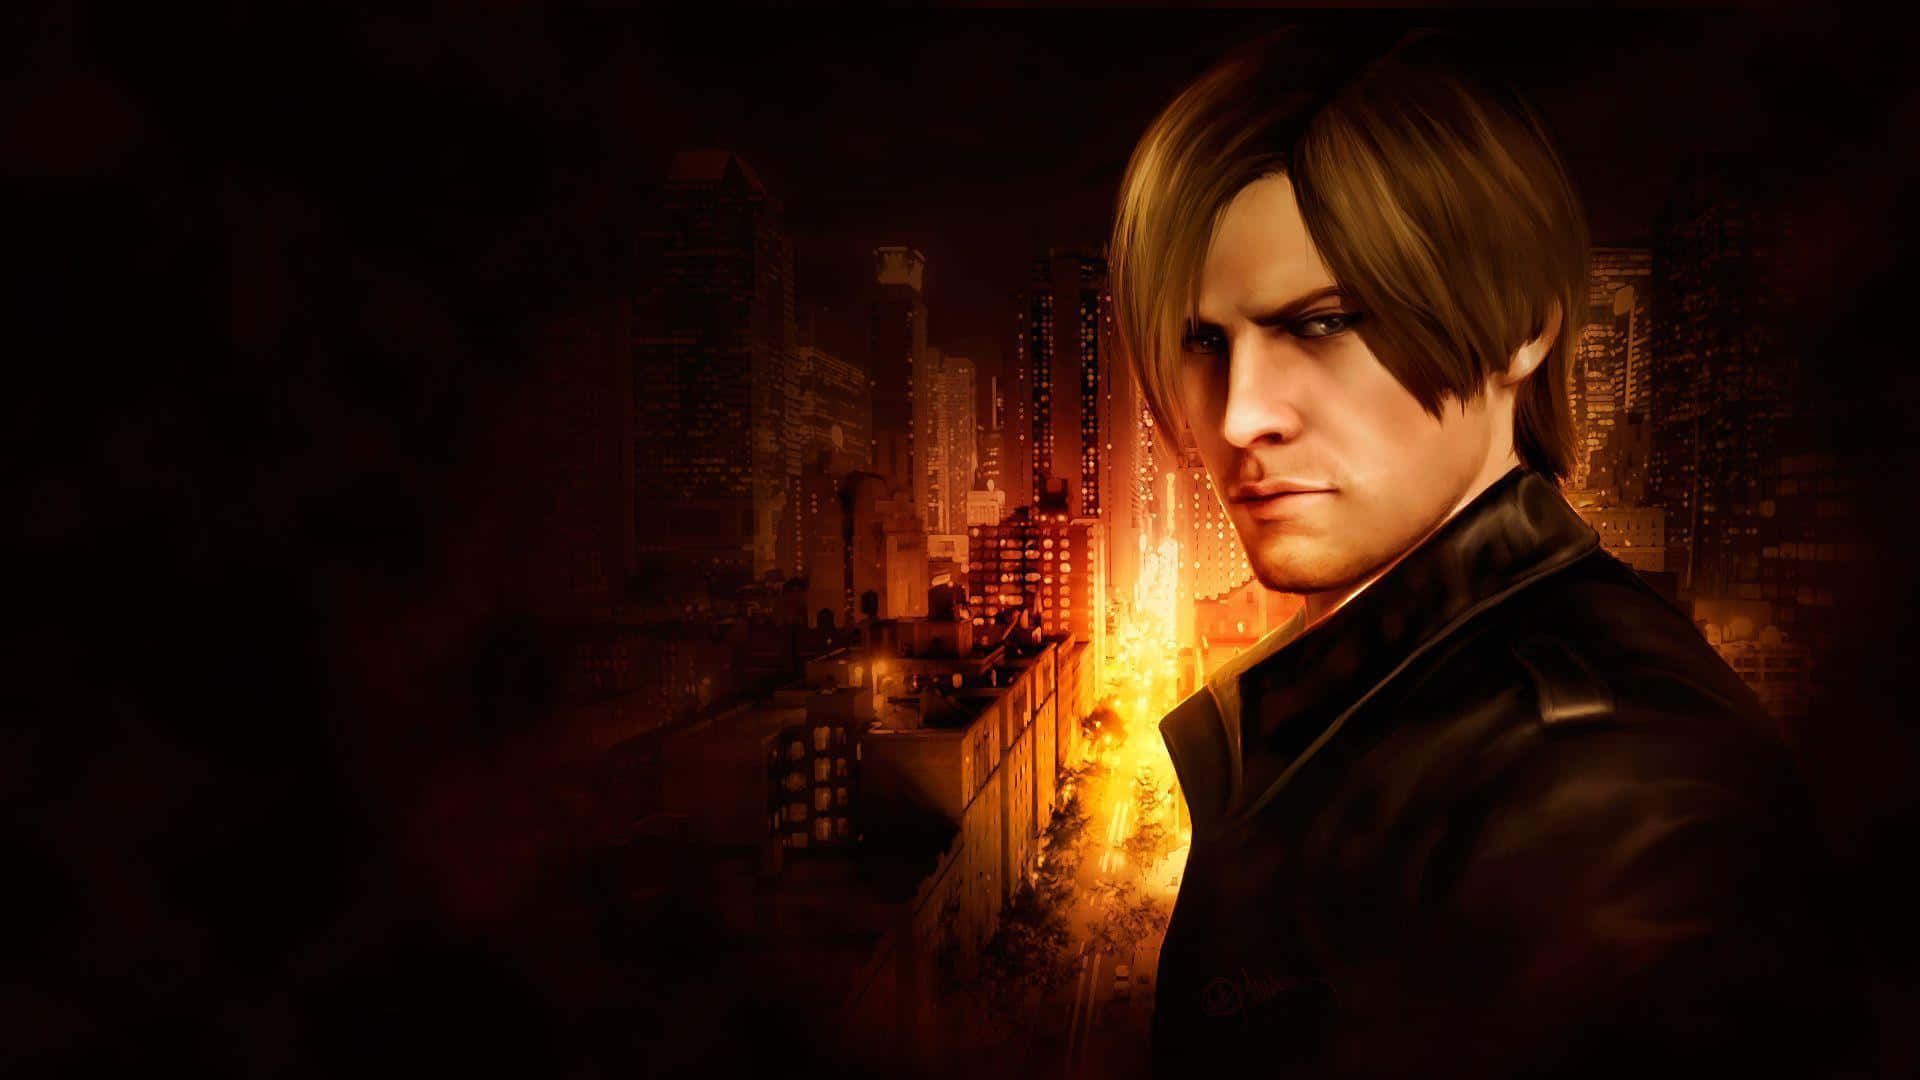 "leon S. Kennedy, The Fearless And Gallant Protector In The Realm Of Resident Evil." Wallpaper